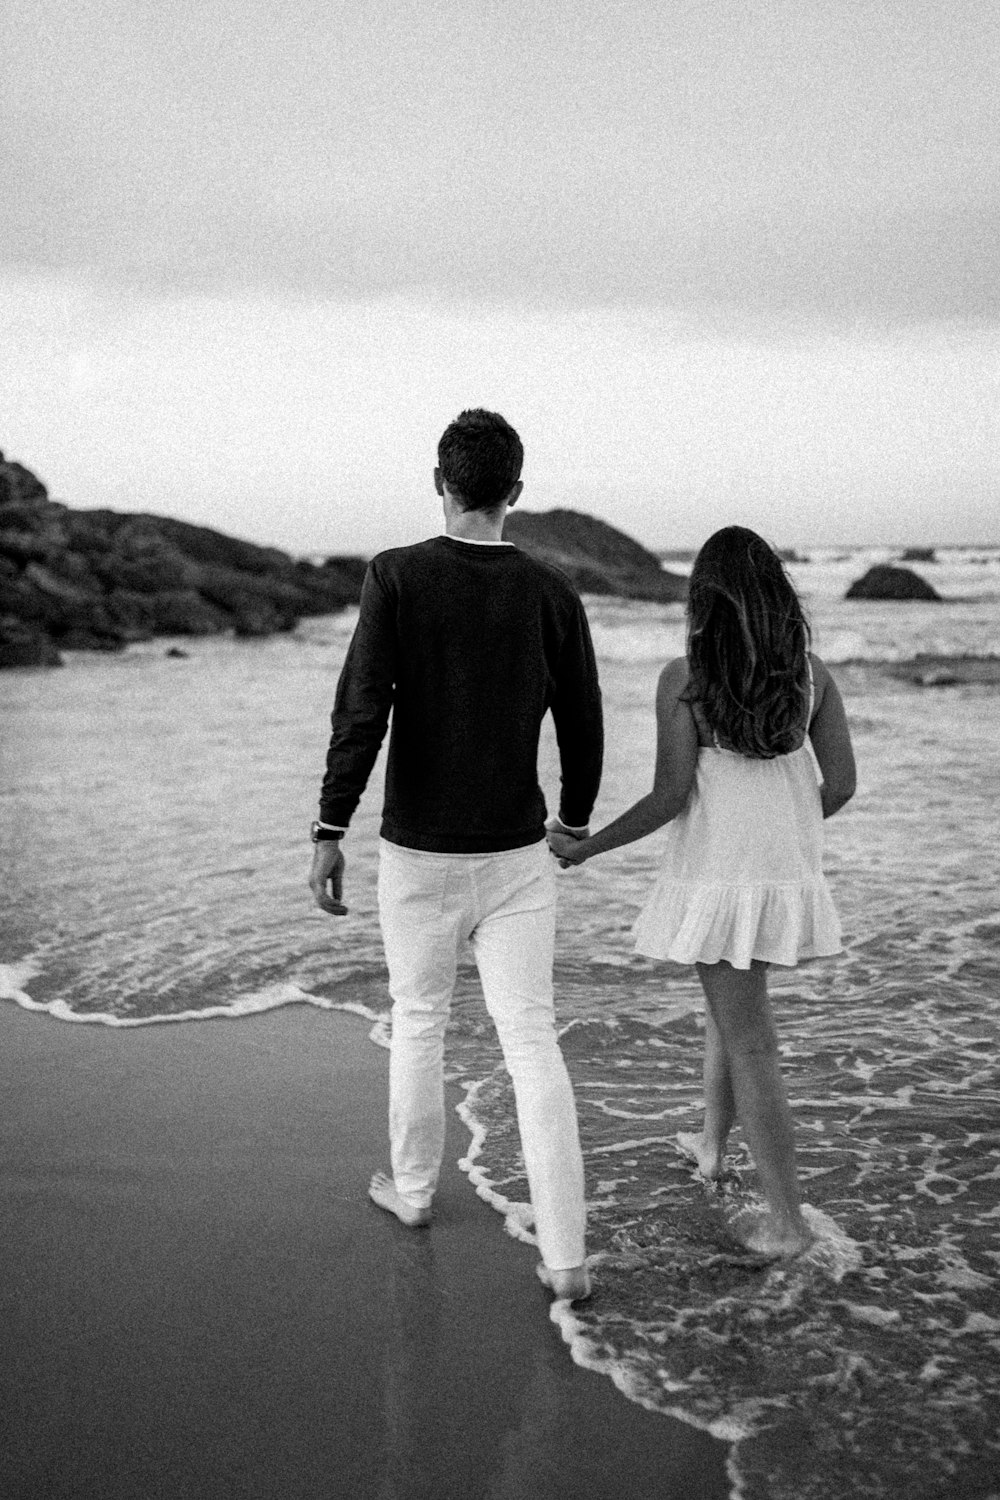 a man and a woman holding hands while walking on the beach